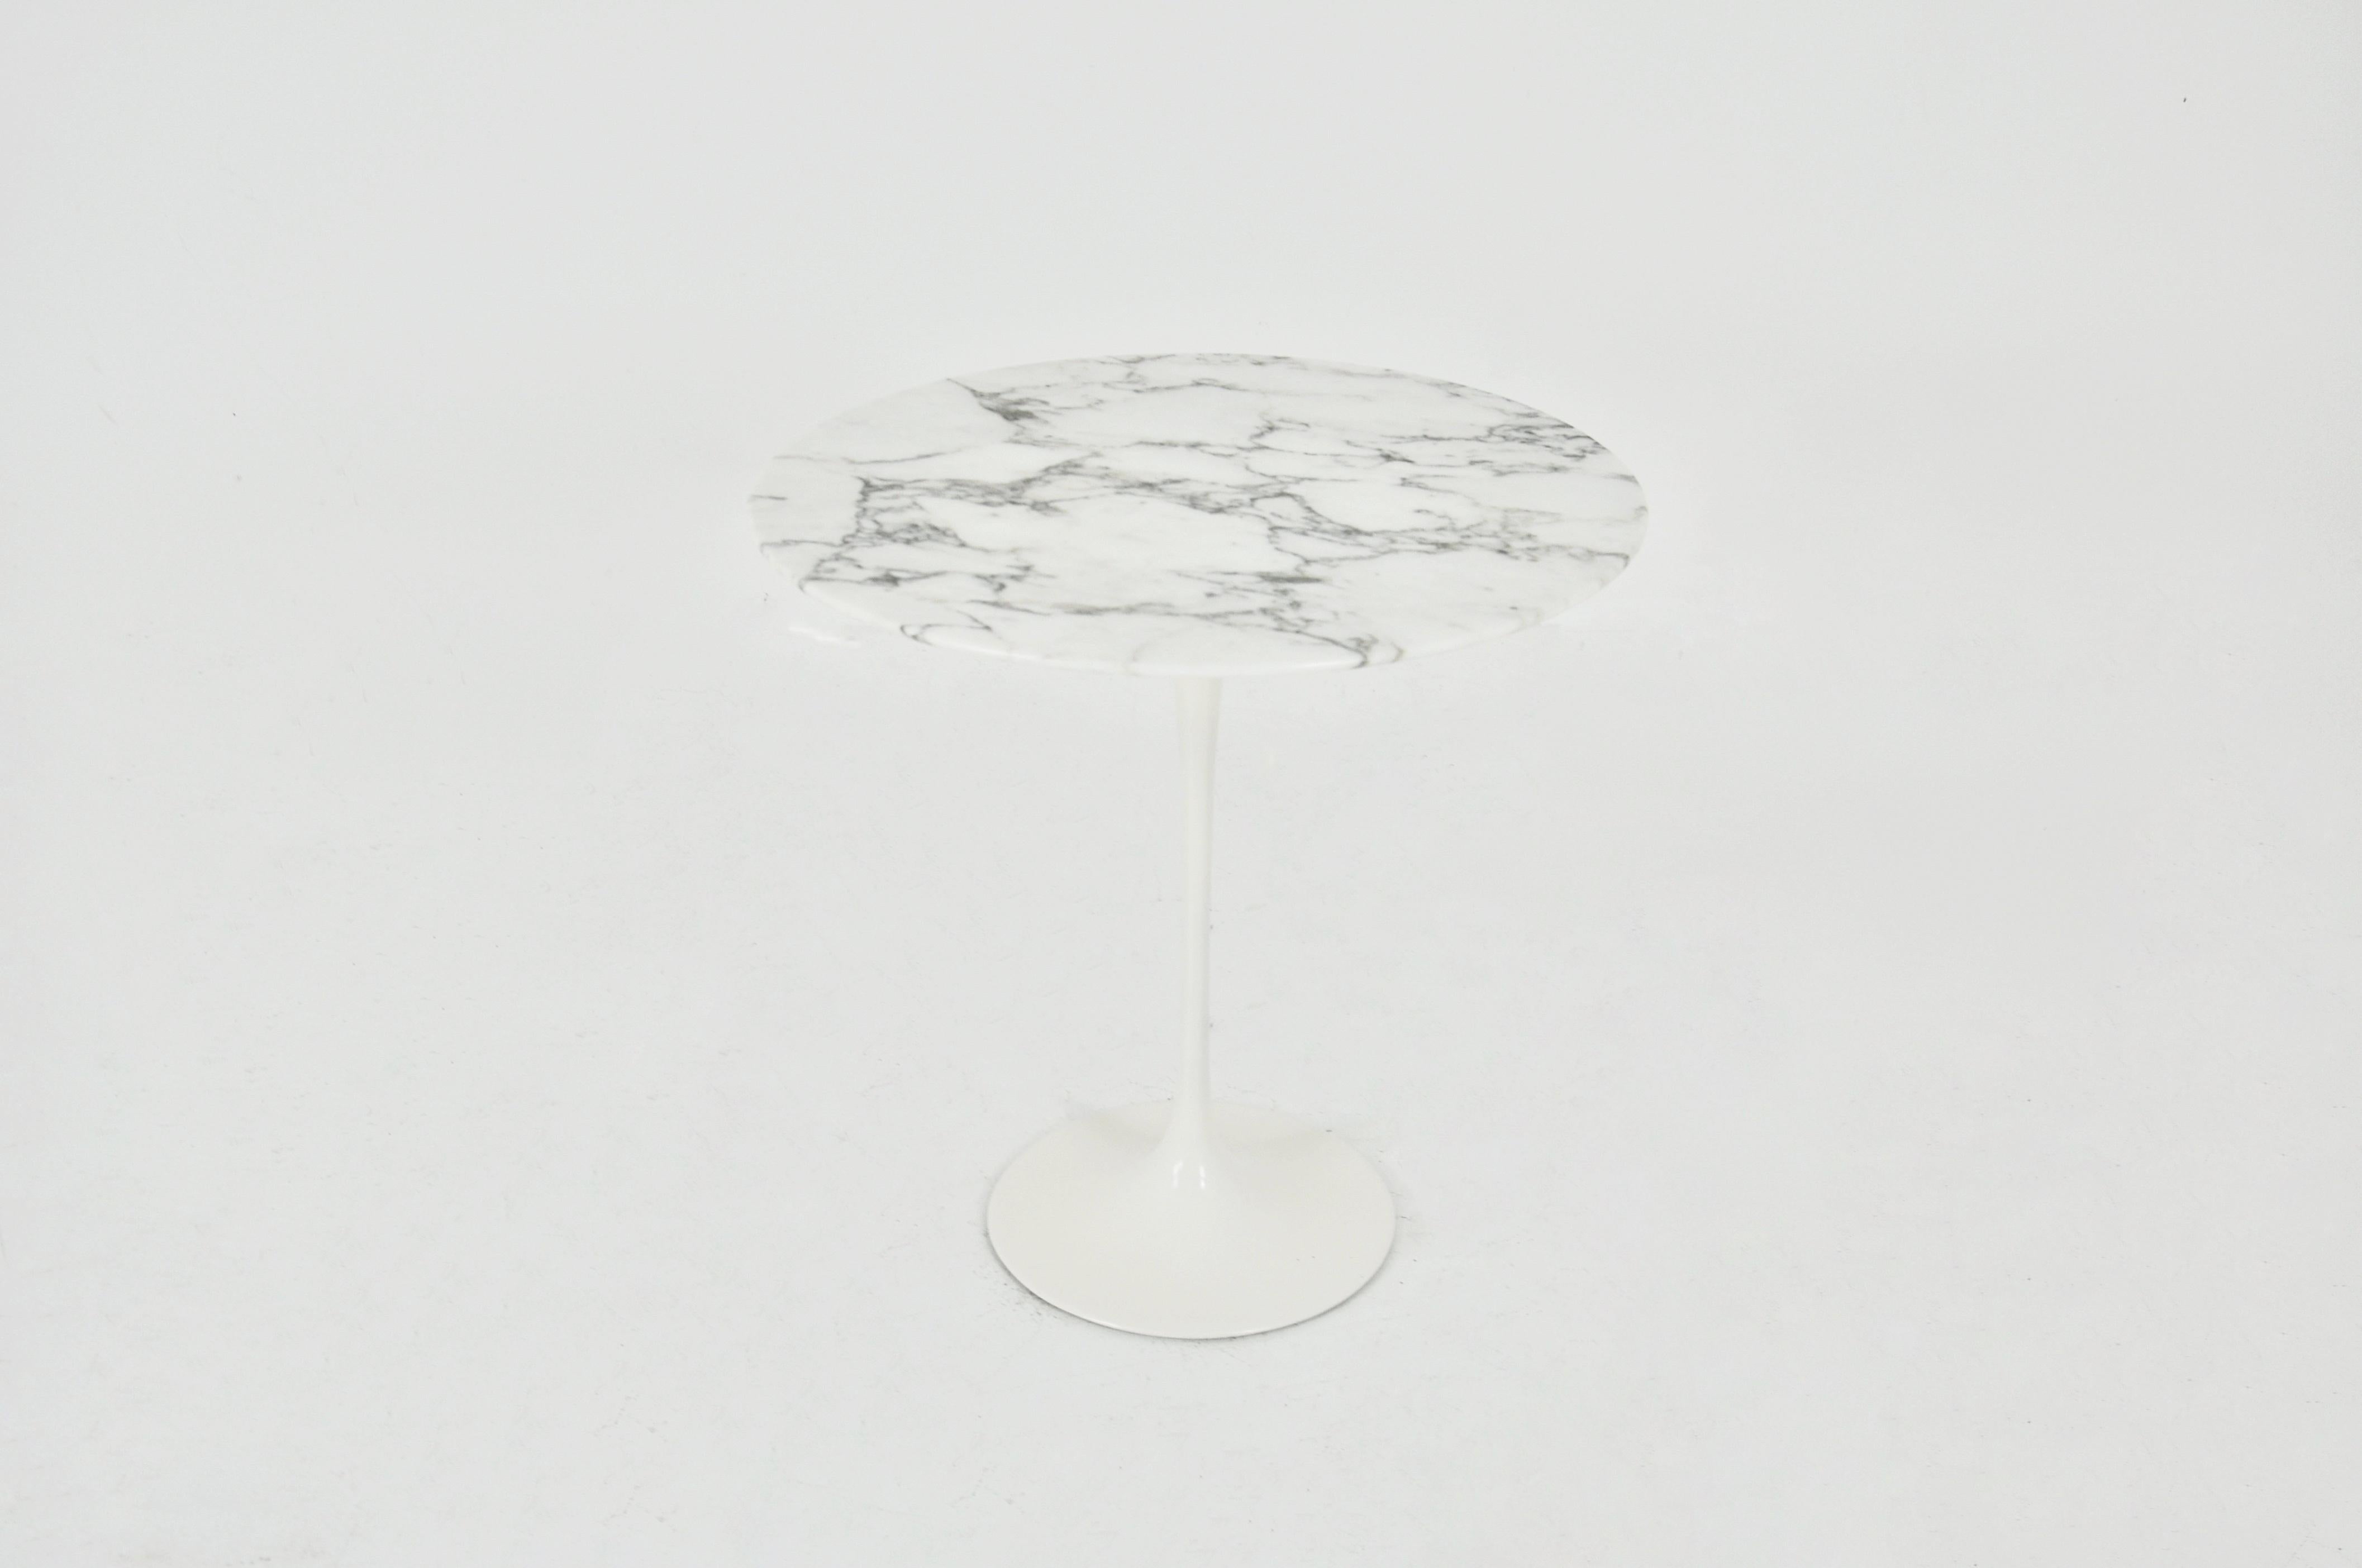 Side table with marble top and aluminum base designed by Eero Saarinen and produced by Knoll International in the 1960s. Wear due to time and age of the table.